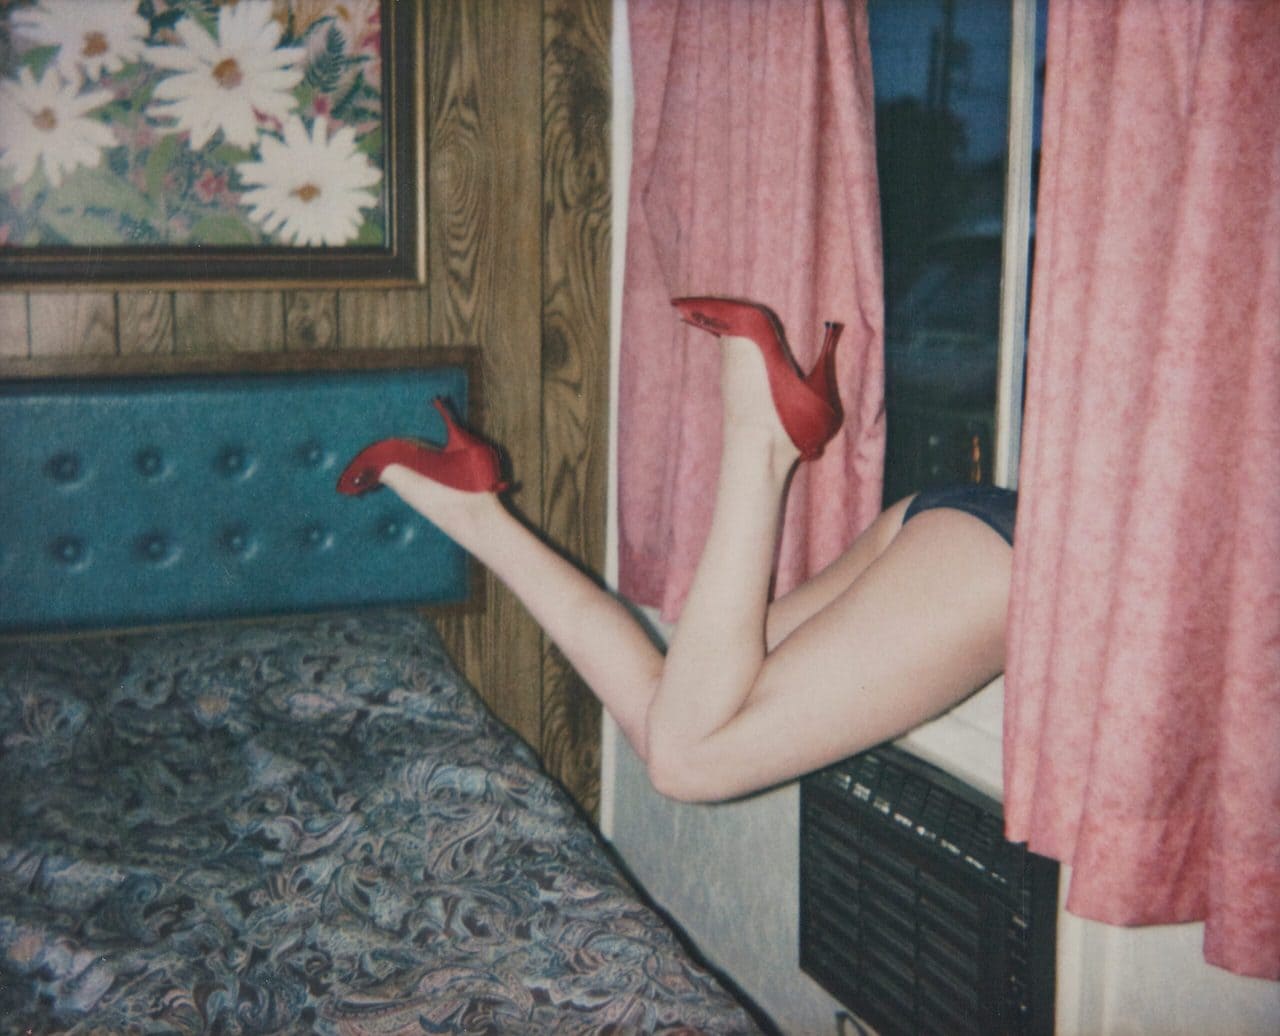 Emma Summerton, Motel 8, 2005, Archival pigment print on Hahnemühle paper, Sheet 98,5 x 118,5 cm (38 3/4 x 46 5/8 in.), Edition of 5, plus 2 AP, Courtesy: Christophe Guye Galerie